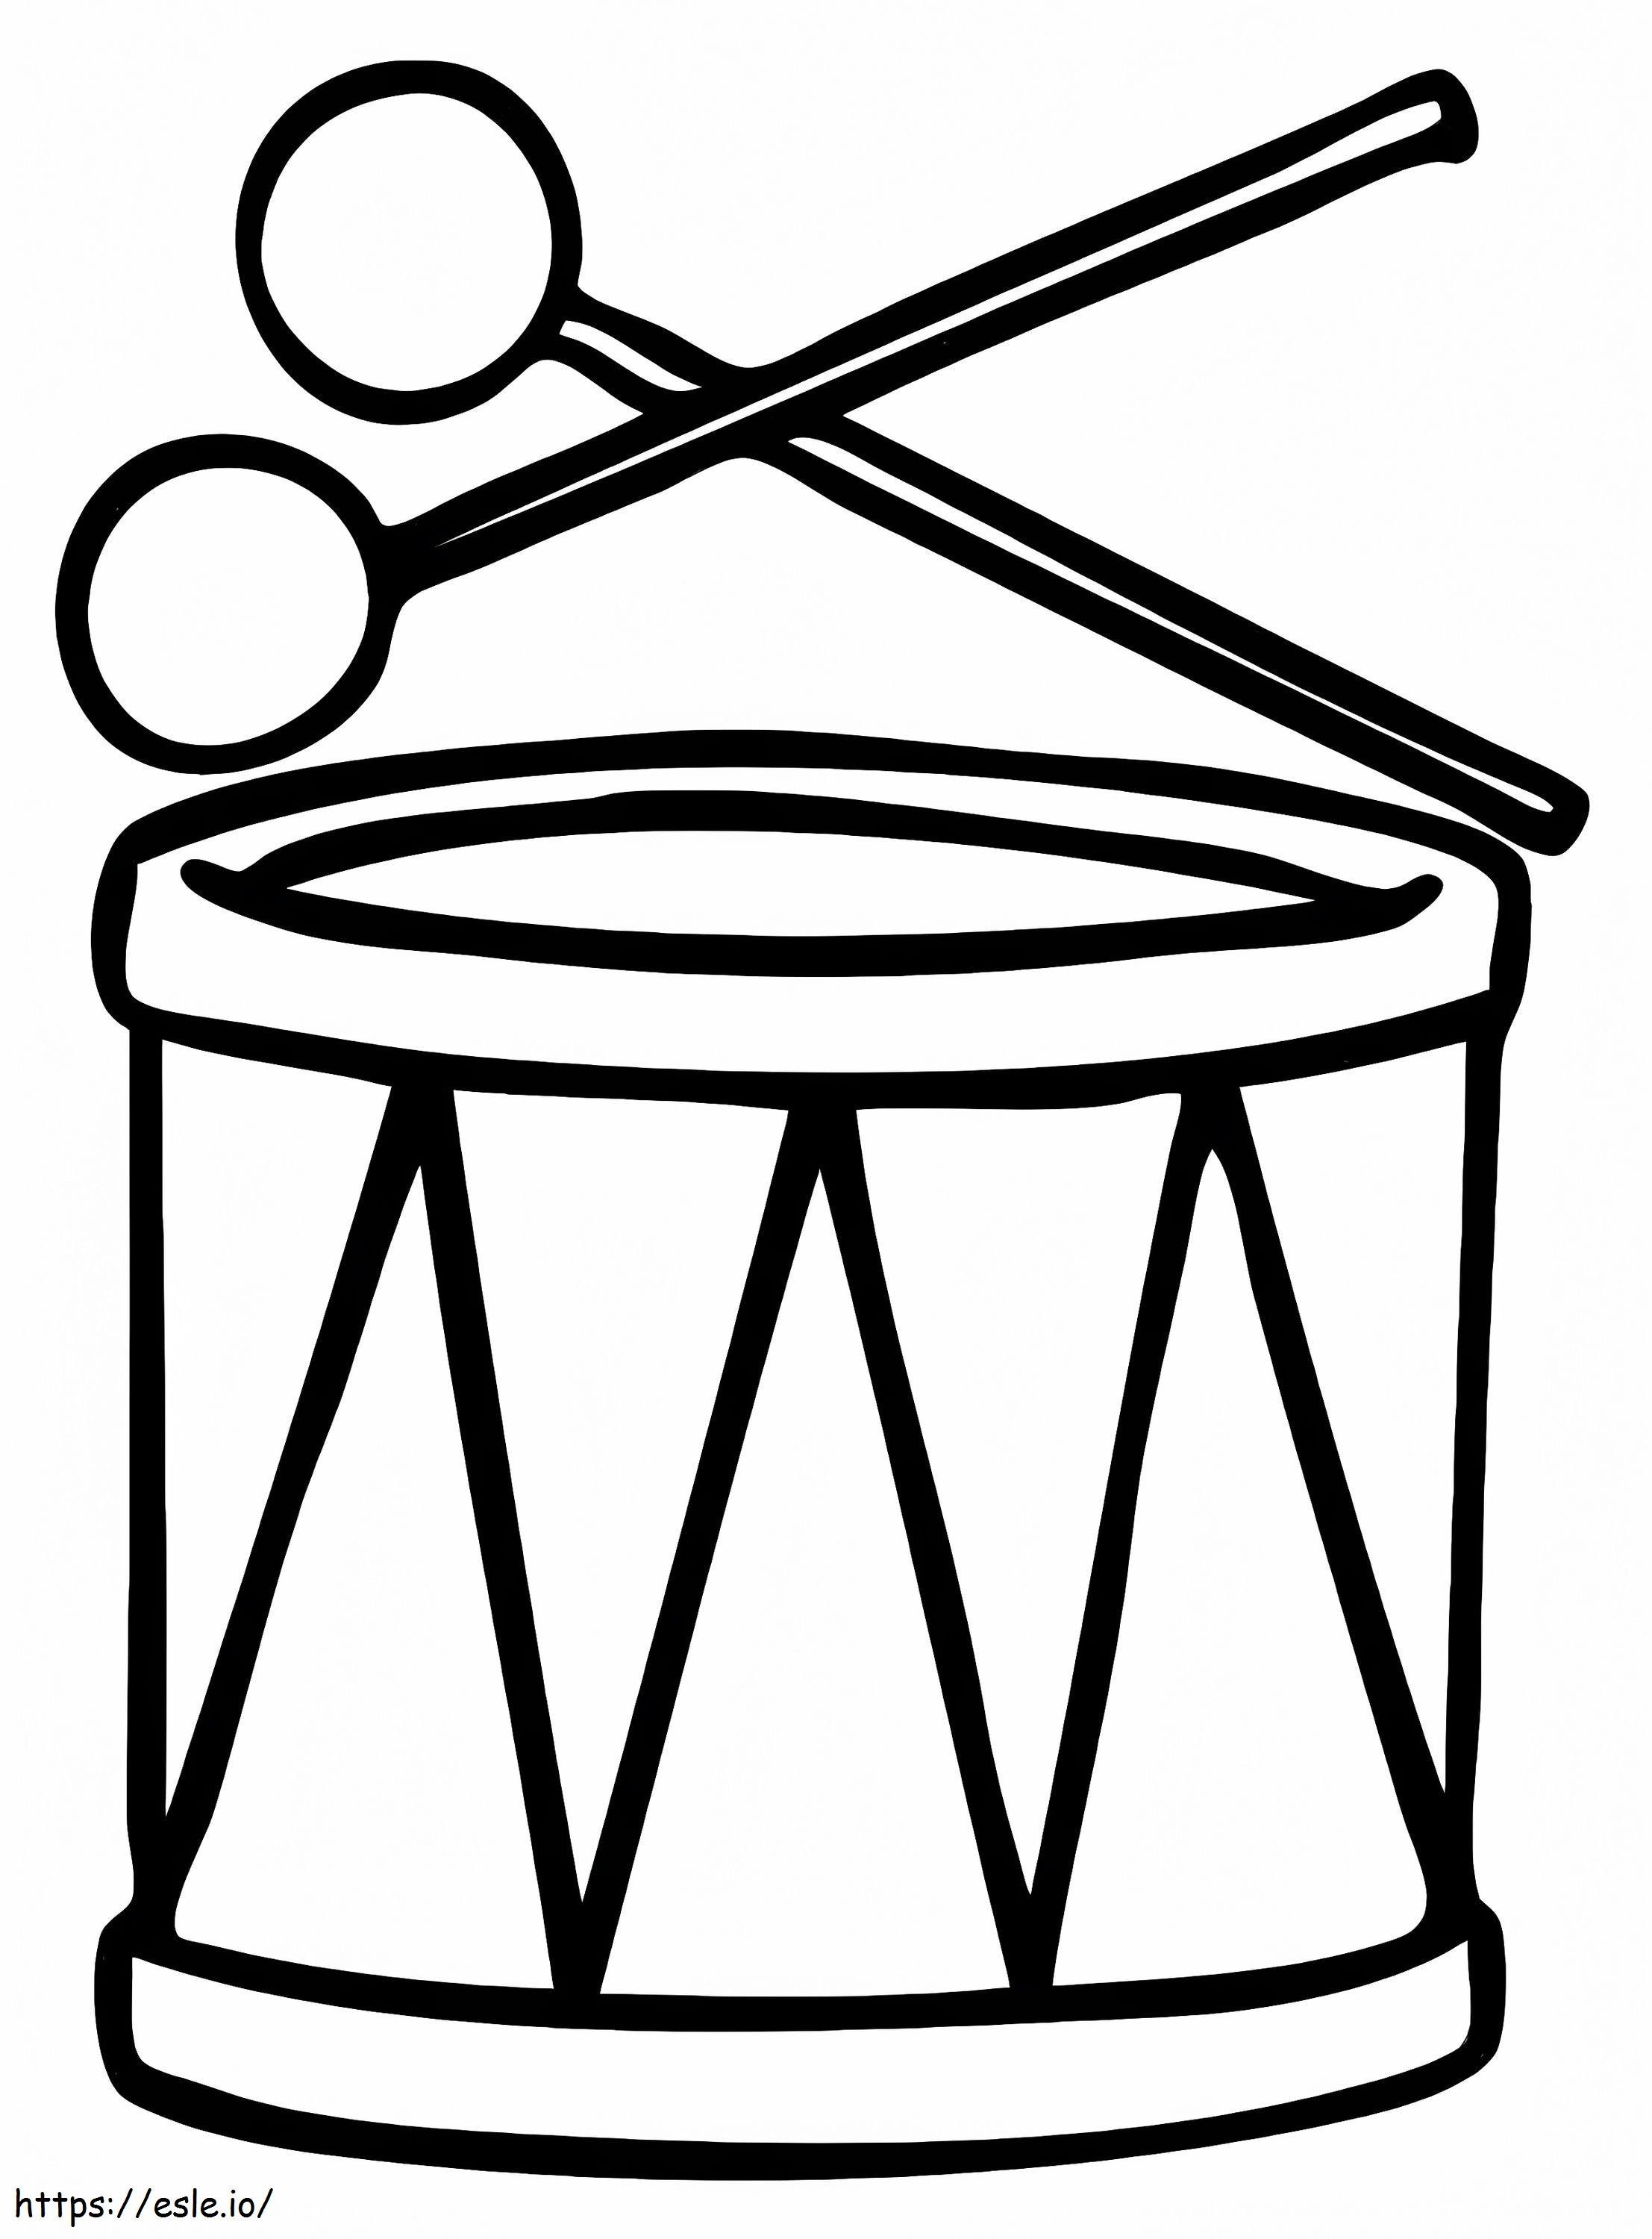 Normal Drum coloring page